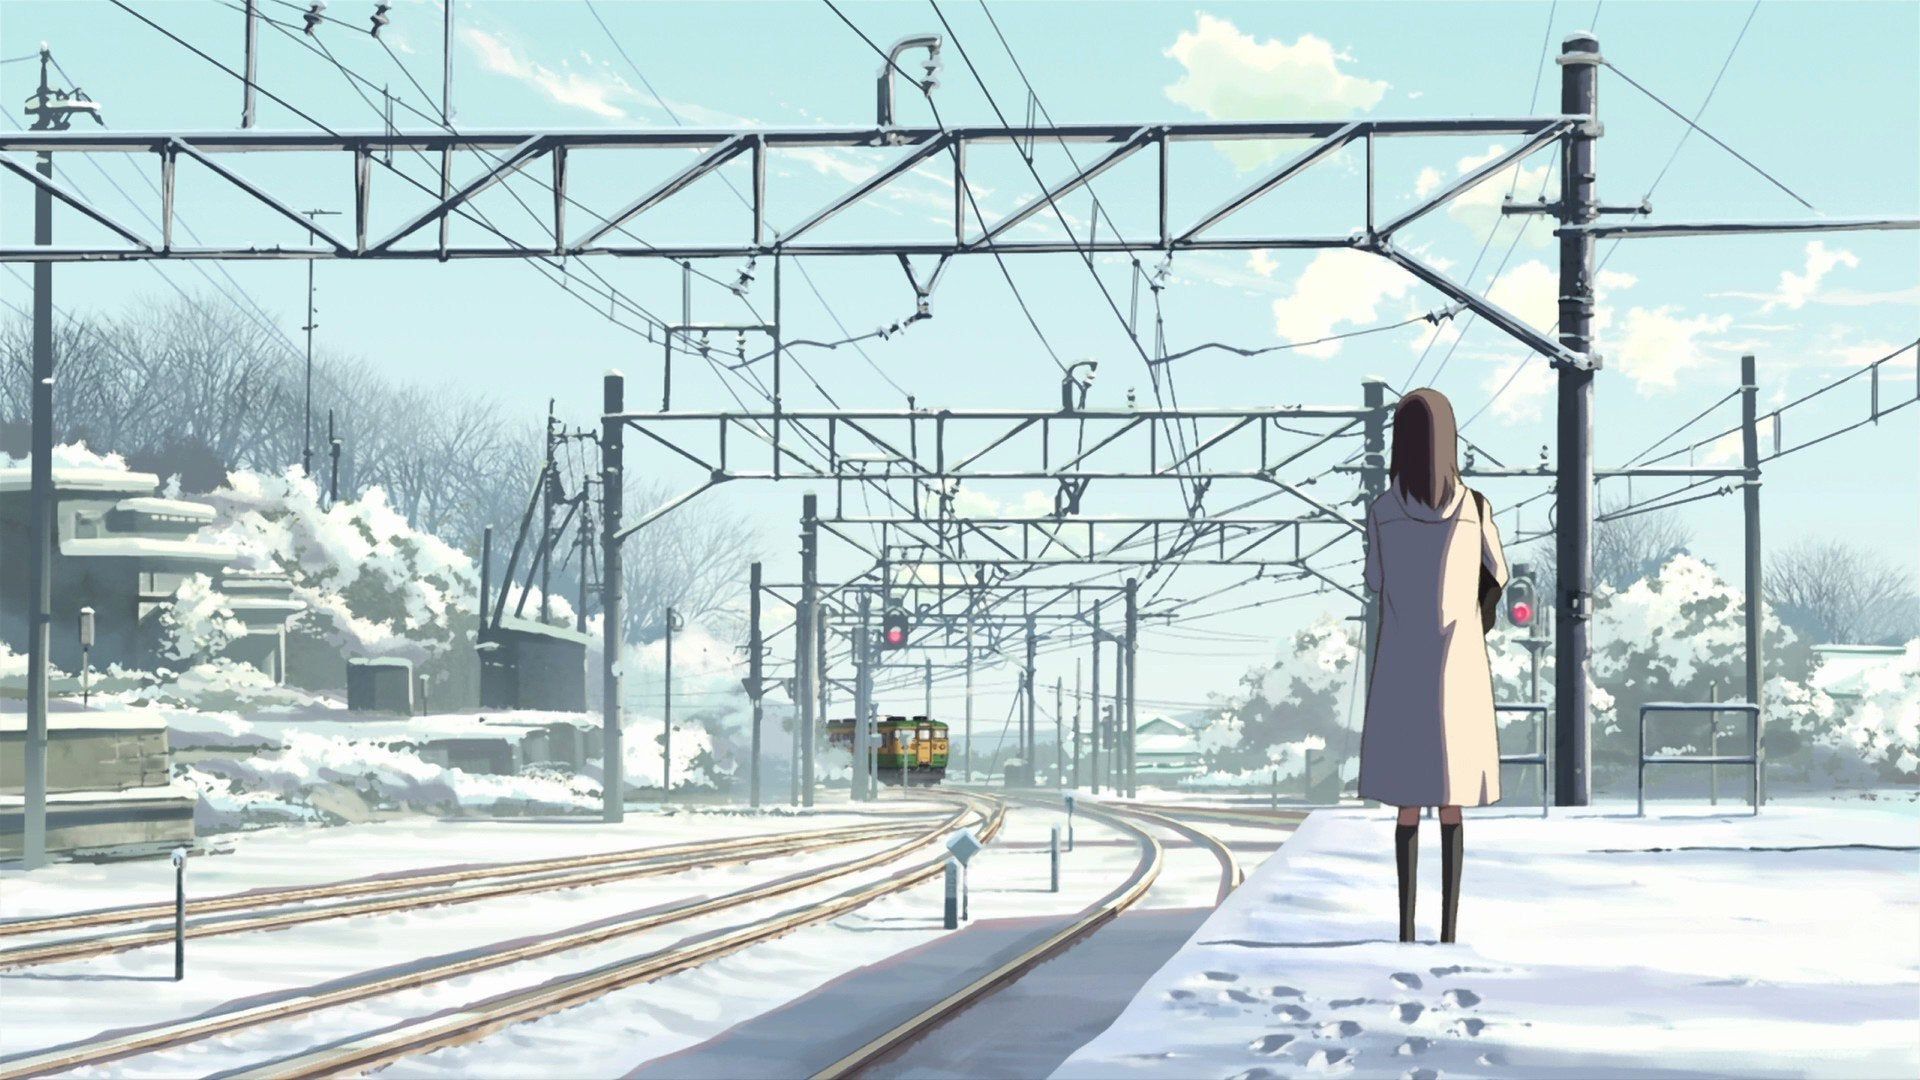 Anime Winter and Train [1920 x 1080]